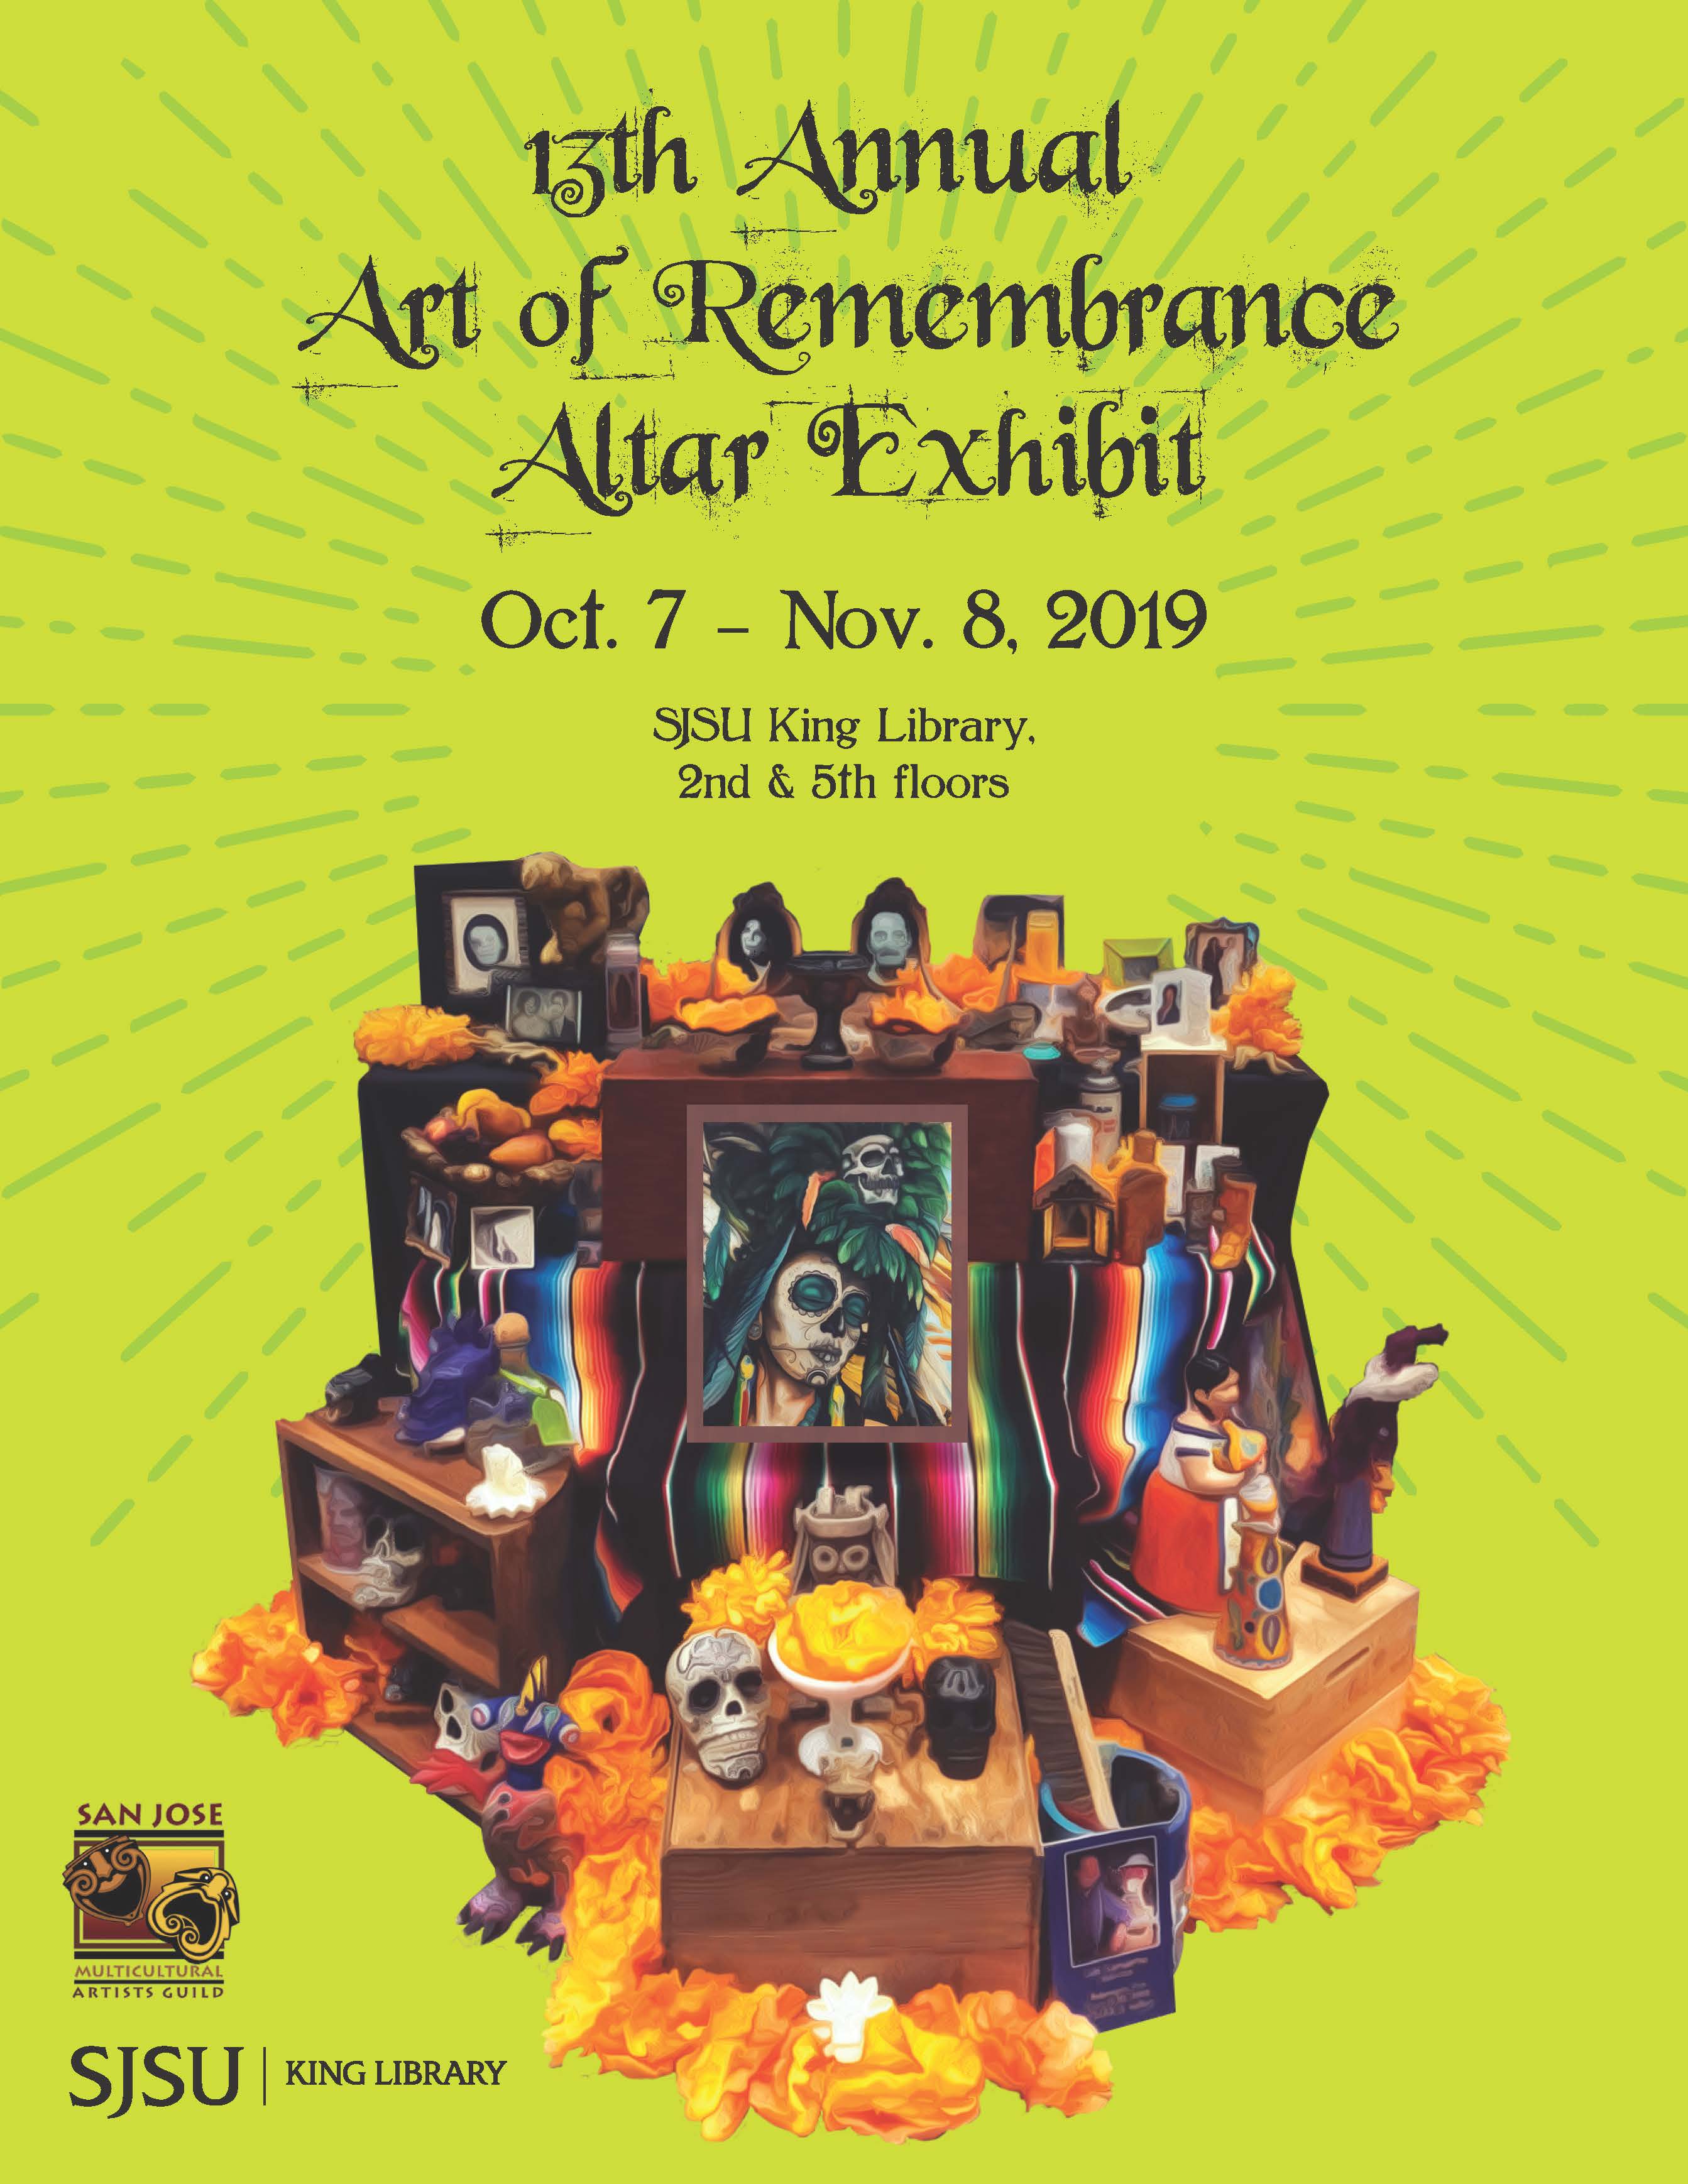 13th Annual Art of Remembrance Altar Exhibit